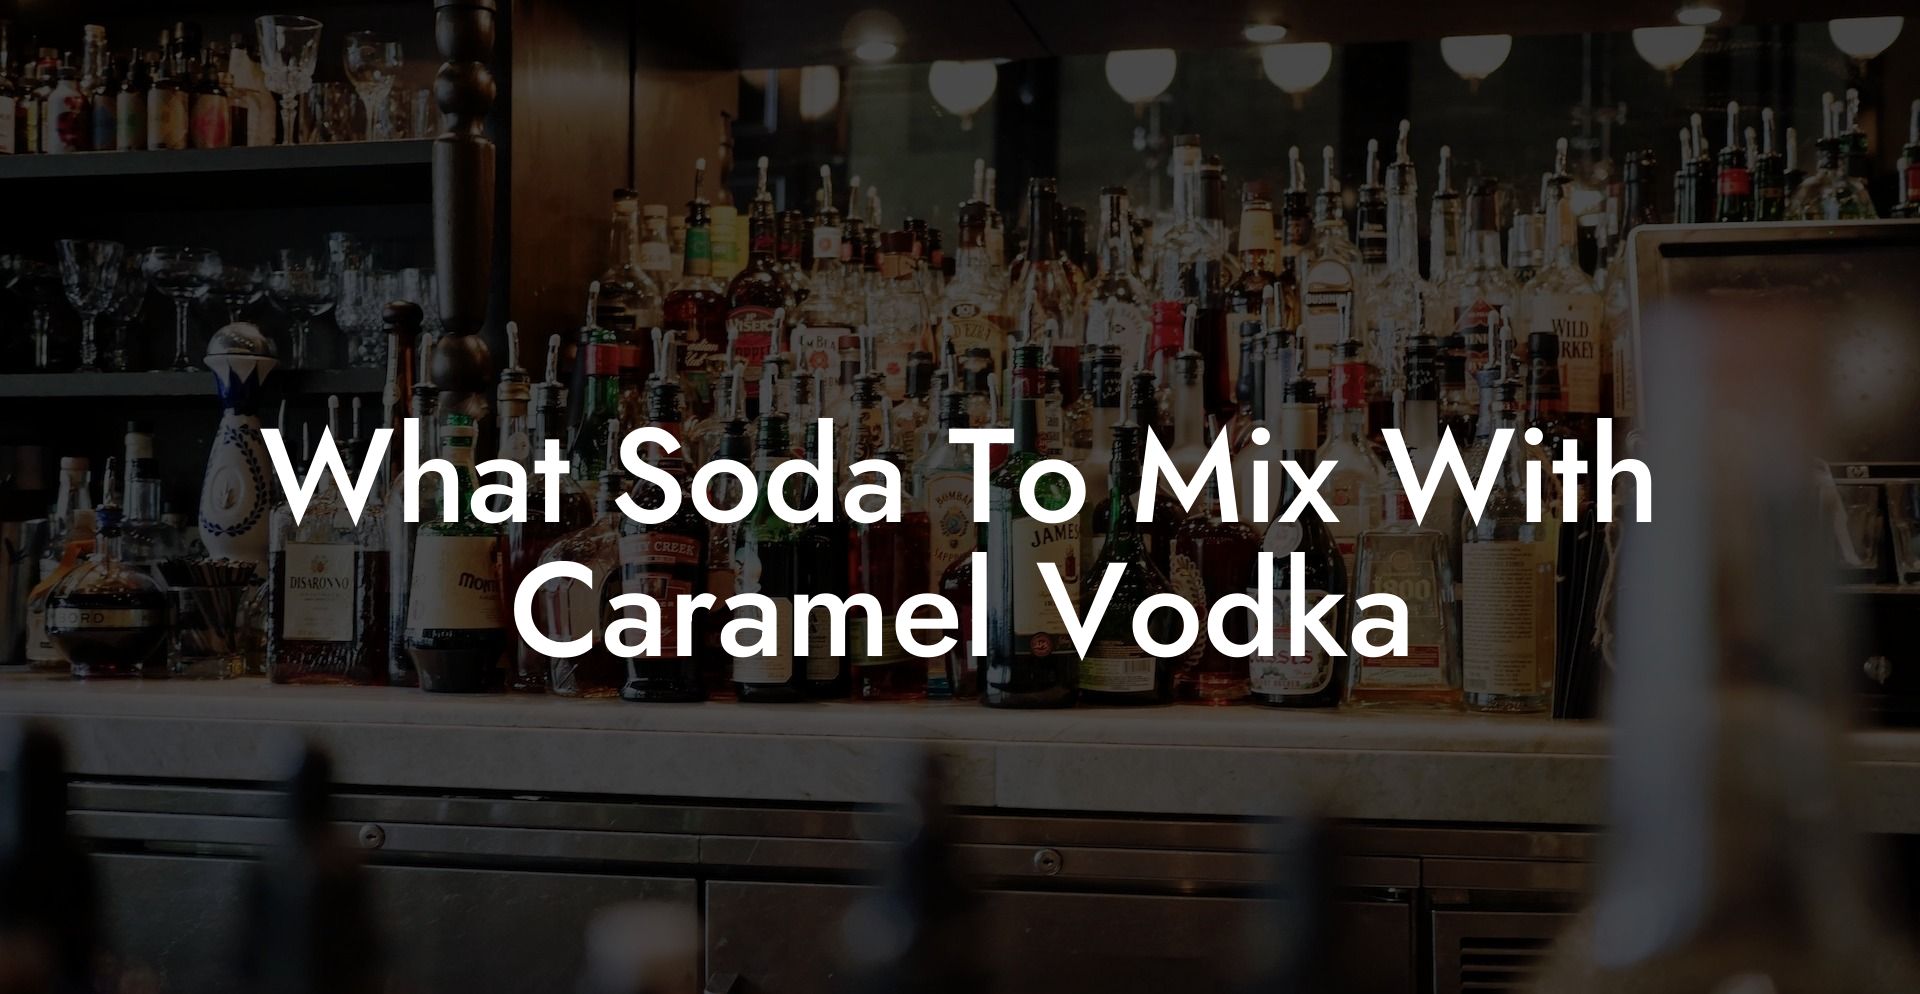 What Soda To Mix With Caramel Vodka